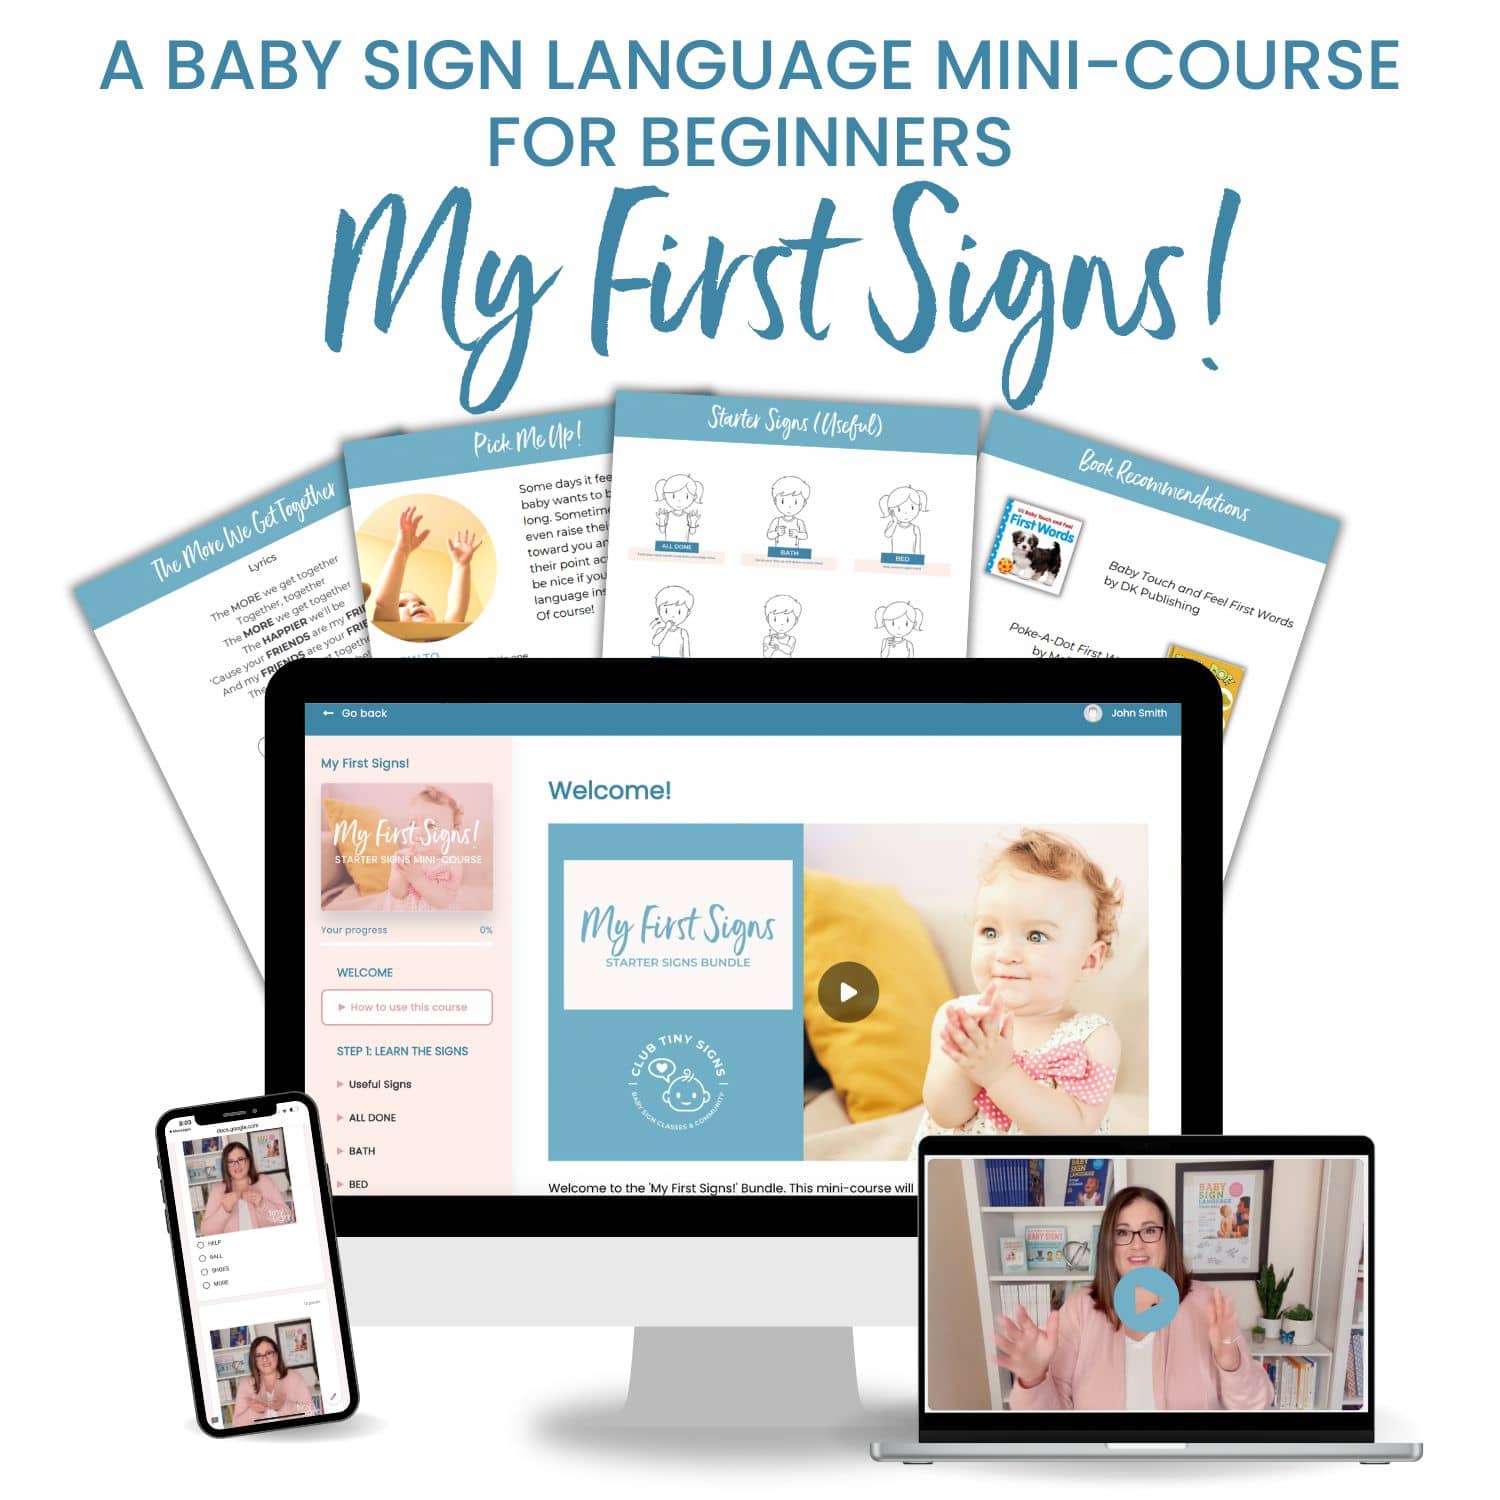 My First Signs! Starter Signs Mini-Course